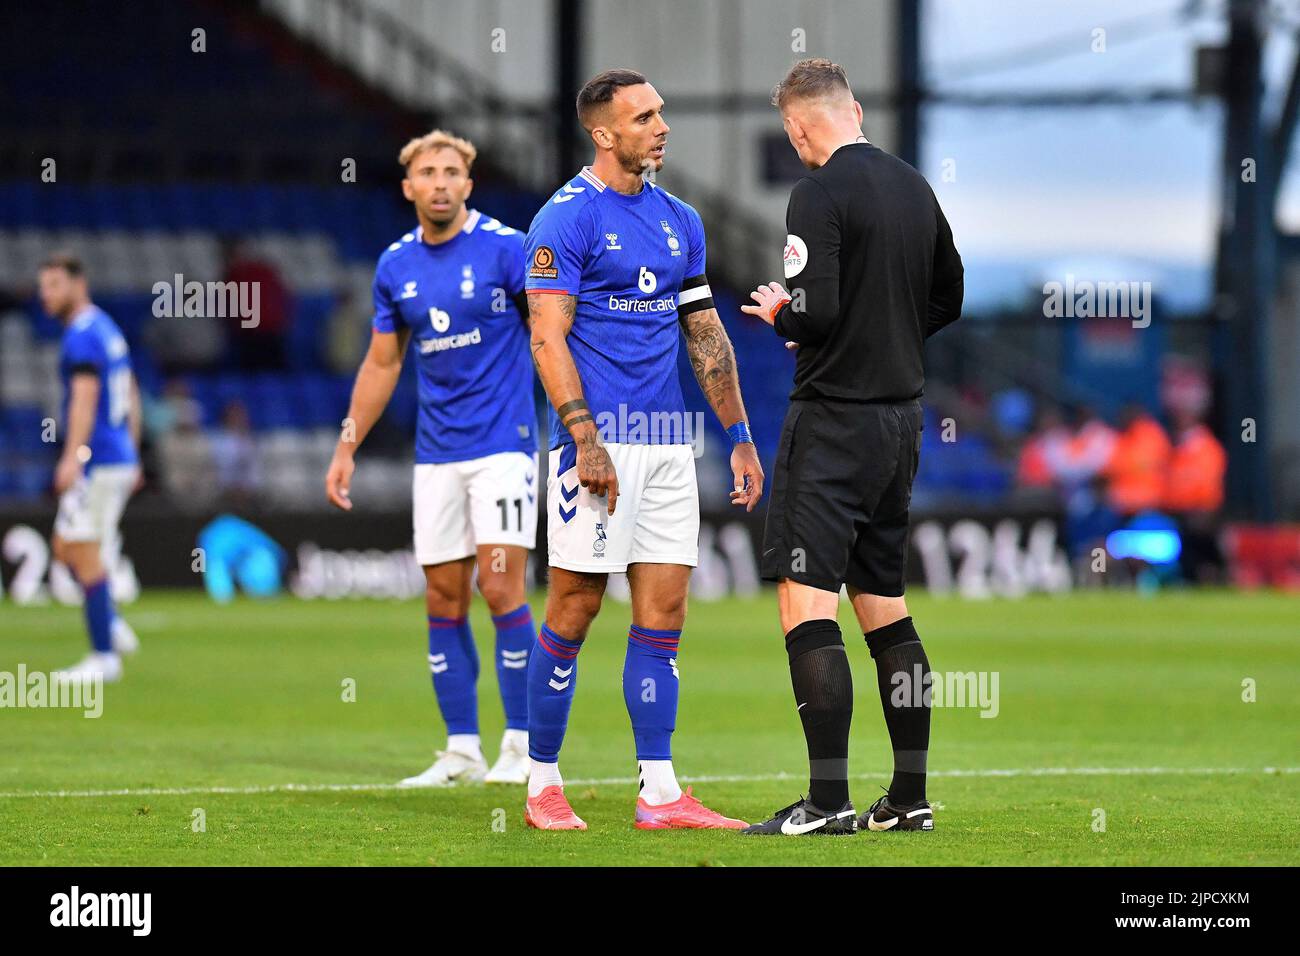 Liam Hogan (Captain) of Oldham Athletic converses with referee Andrew Miller during the Vanarama National League match between Oldham Athletic and Wealdstone at Boundary Park, Oldham on Wednesday 17th August 2022. (Credit: Eddie Garvey | MI News) Credit: MI News & Sport /Alamy Live News Stock Photo